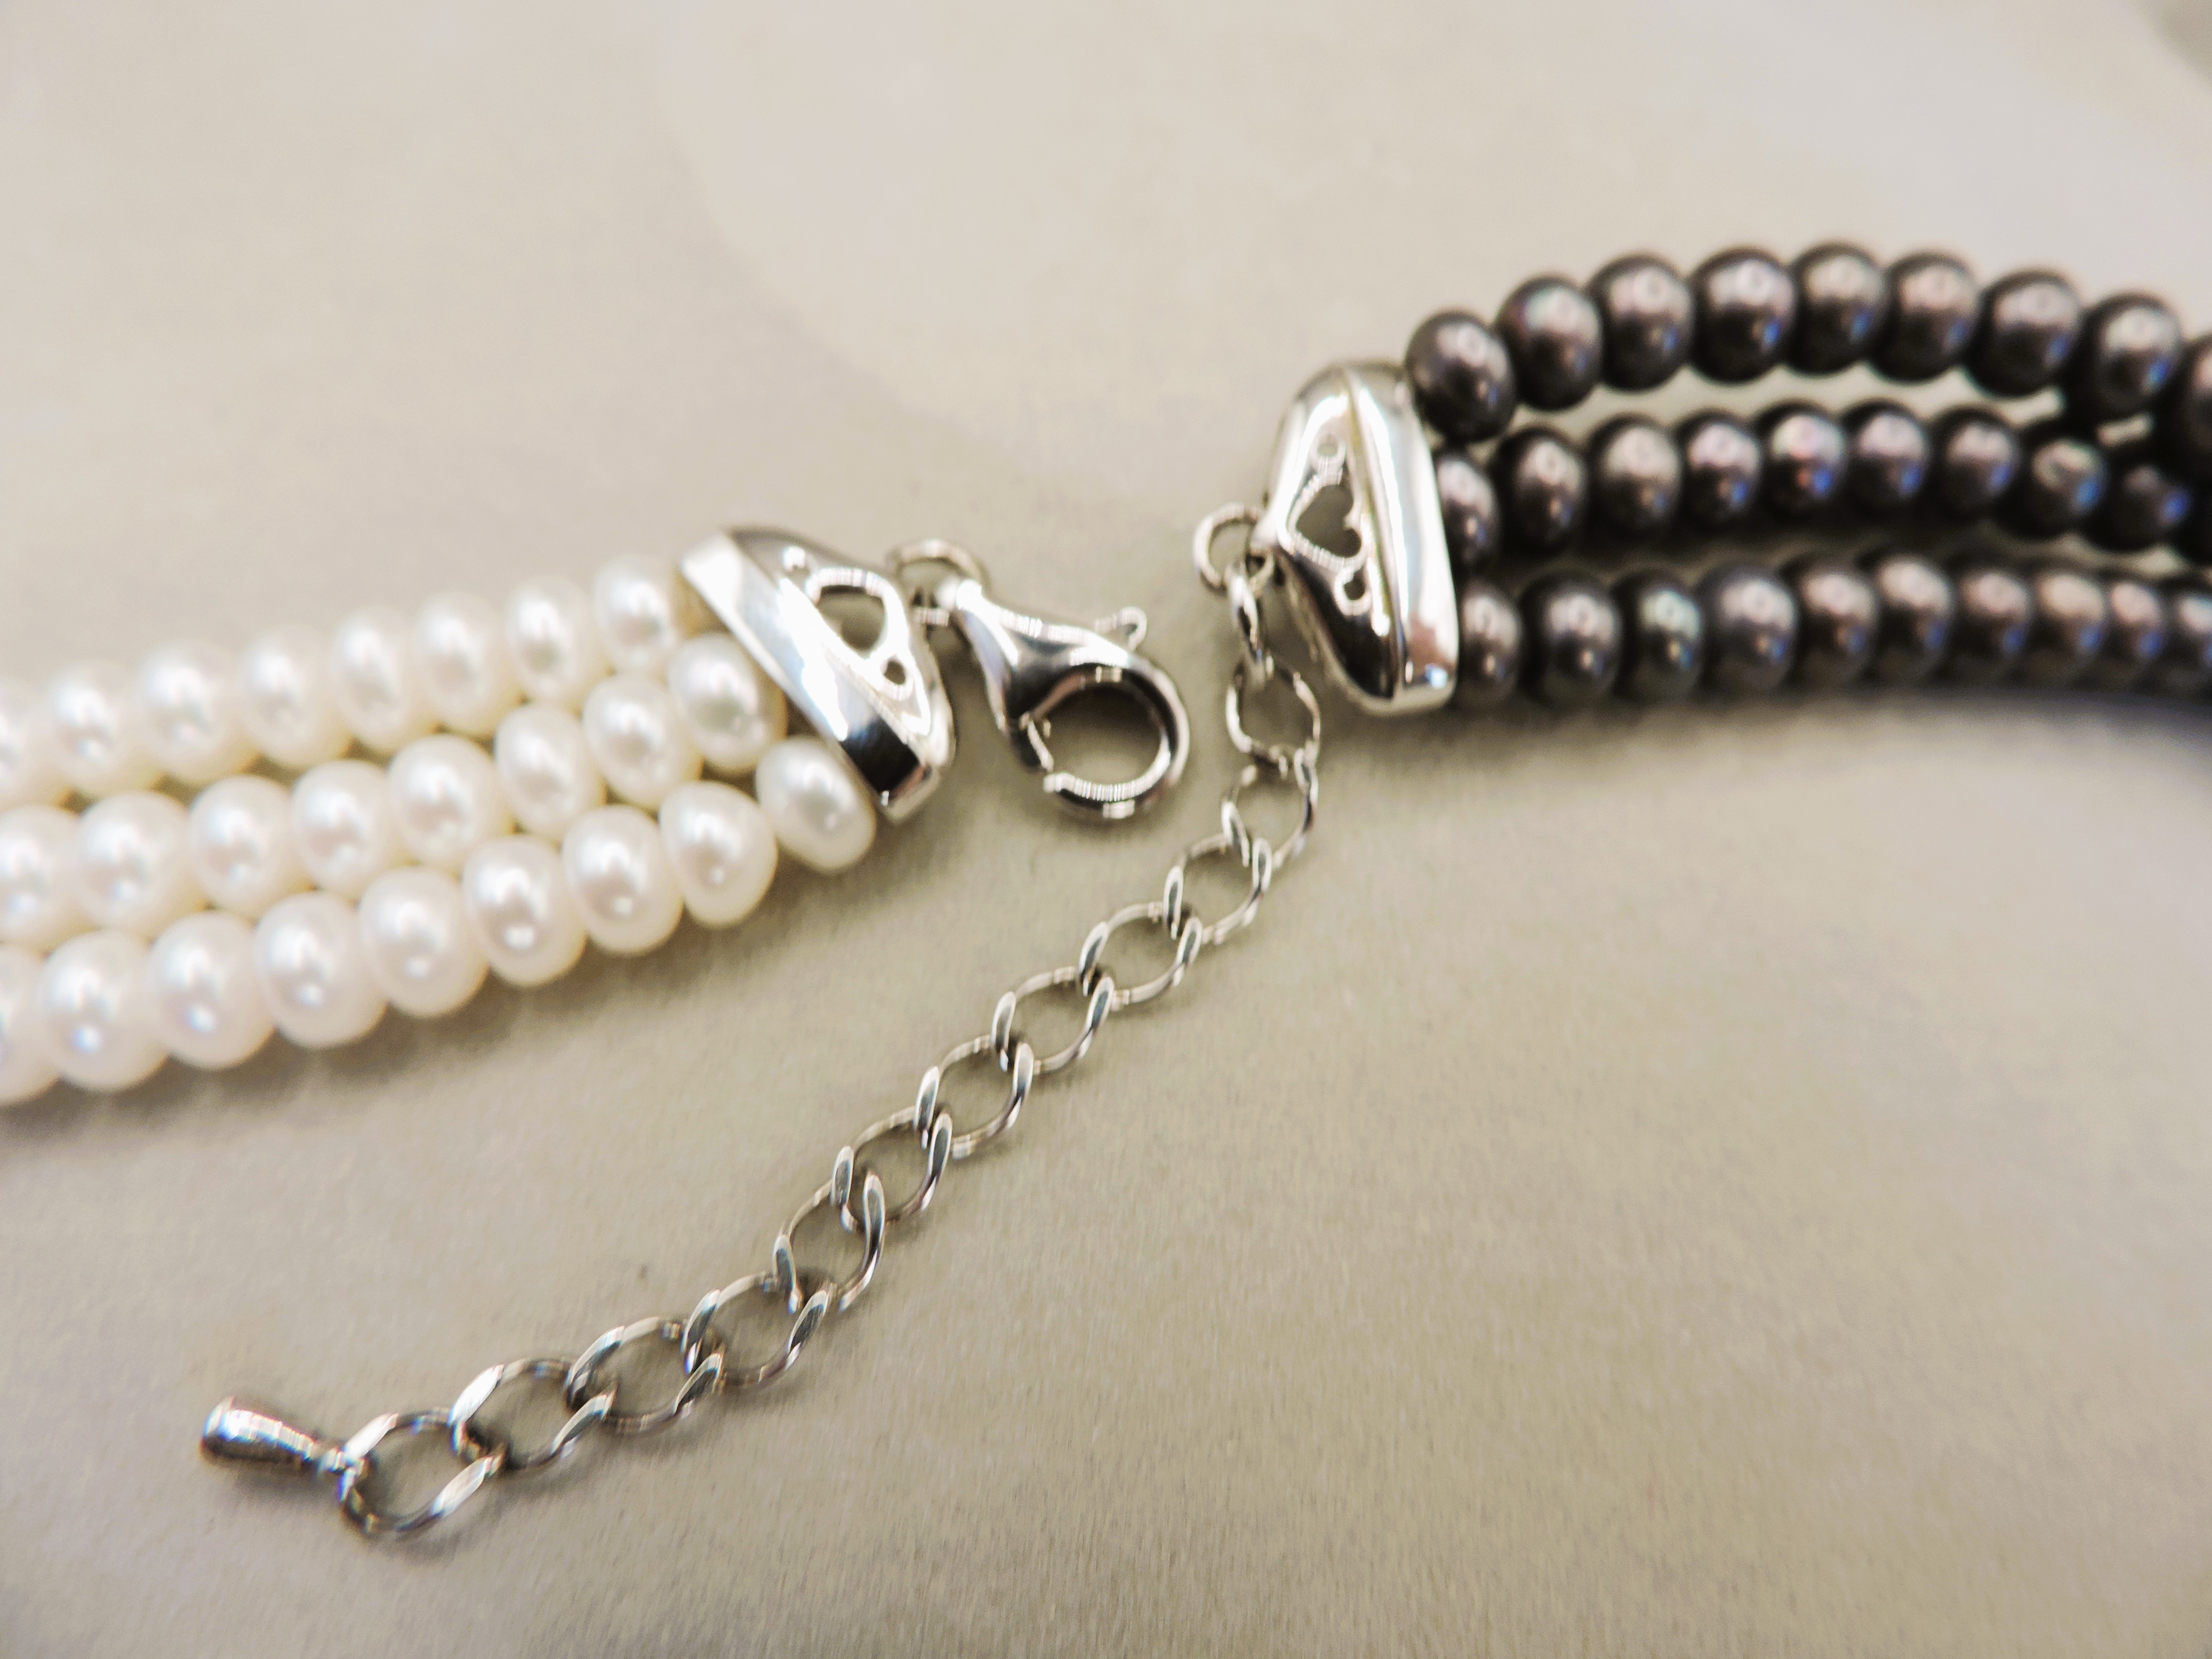 Cultured Pearl Necklace Silver Clasp New With Gift Box - Image 5 of 7